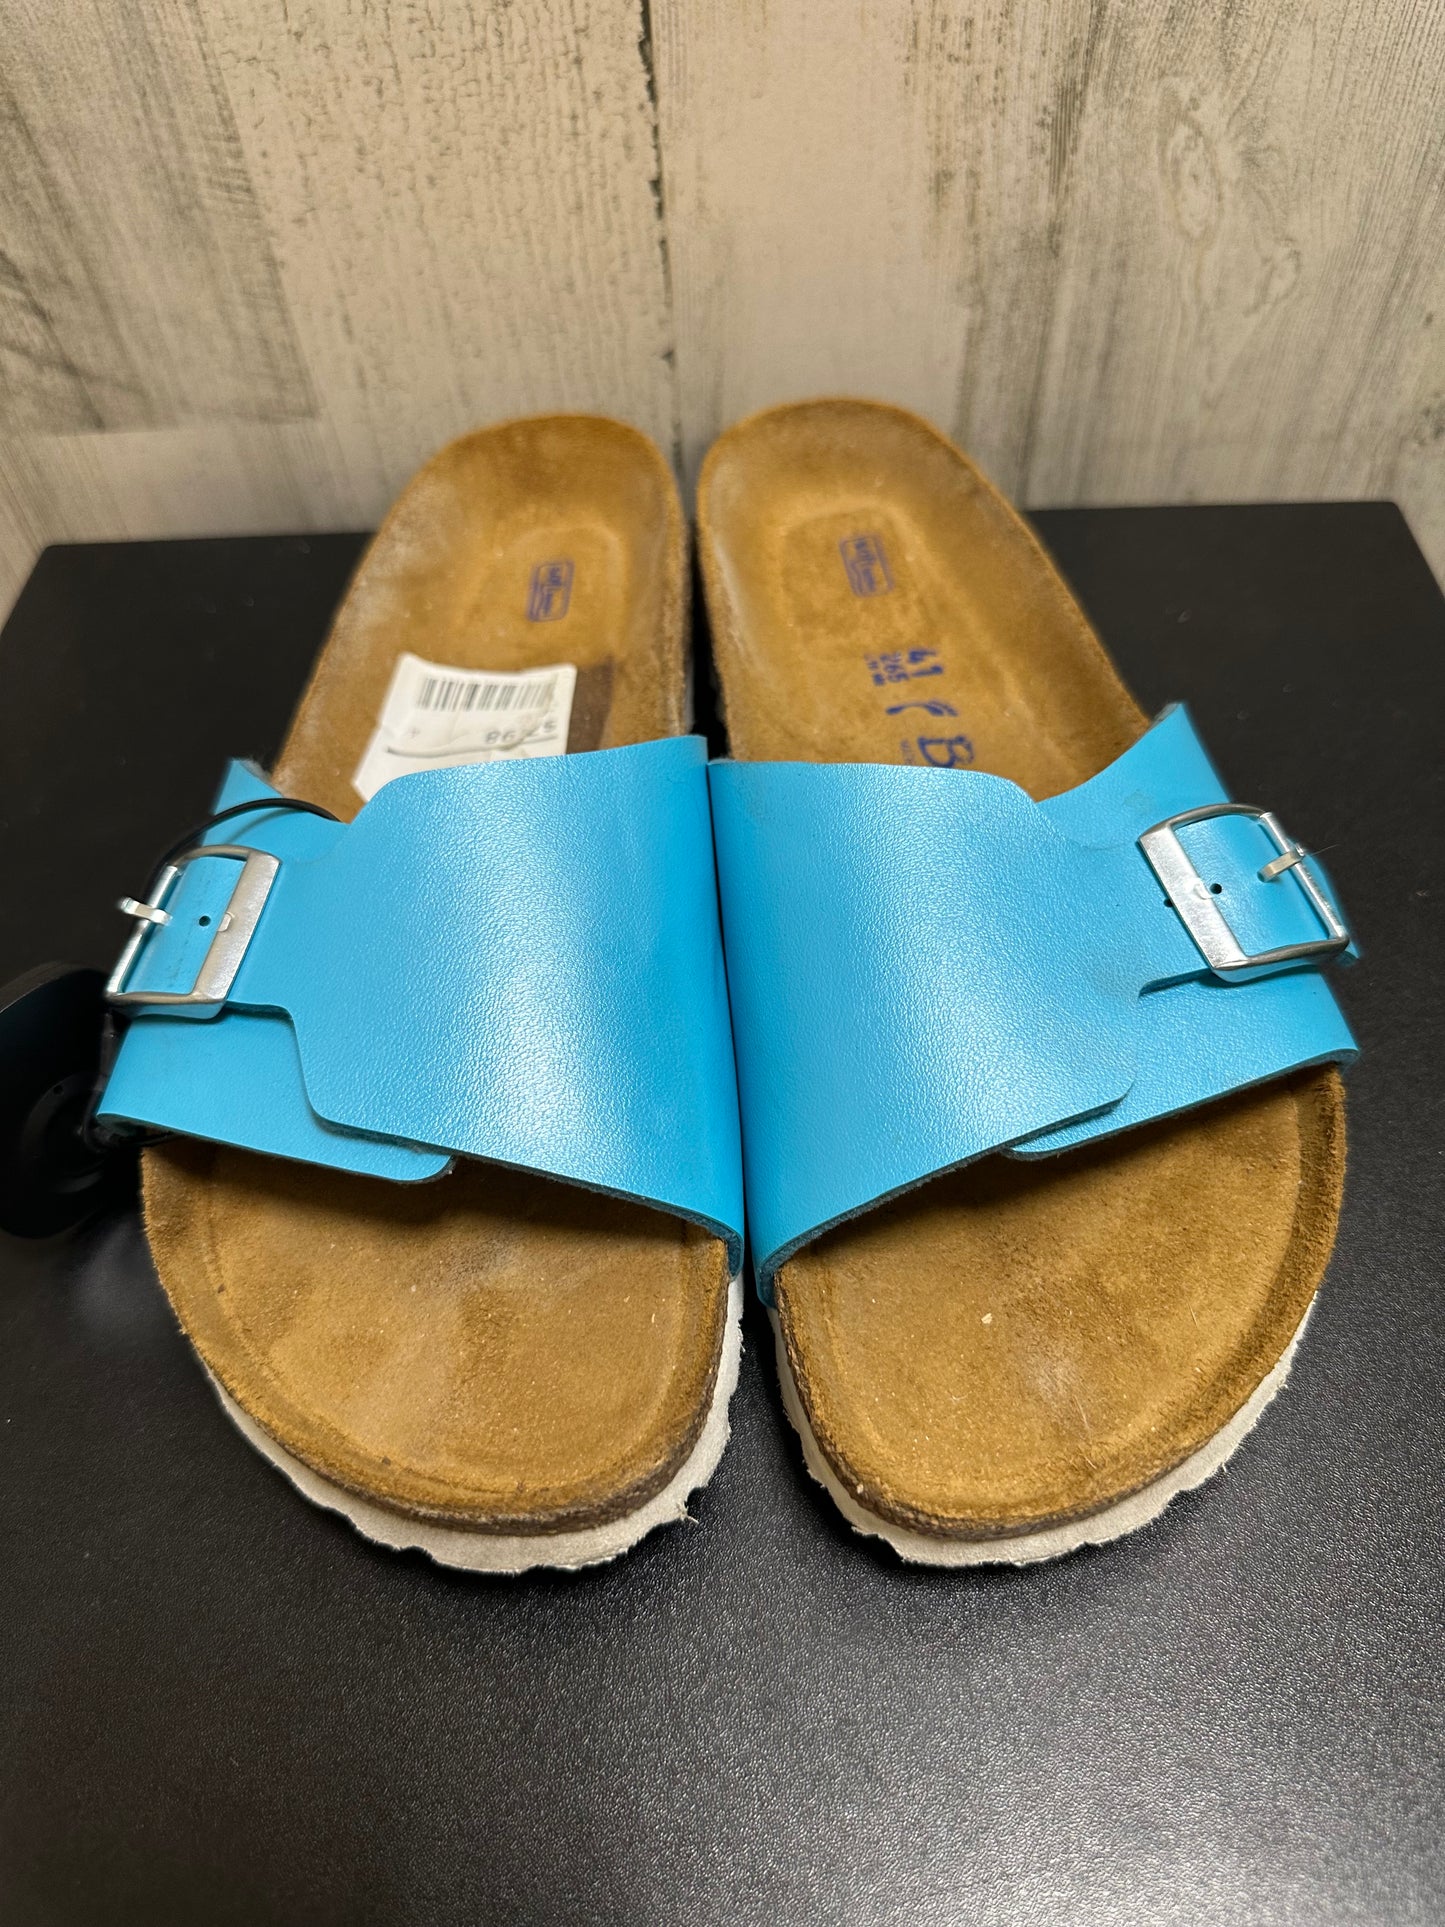 Sandals Flats By Cmc  Size: 10